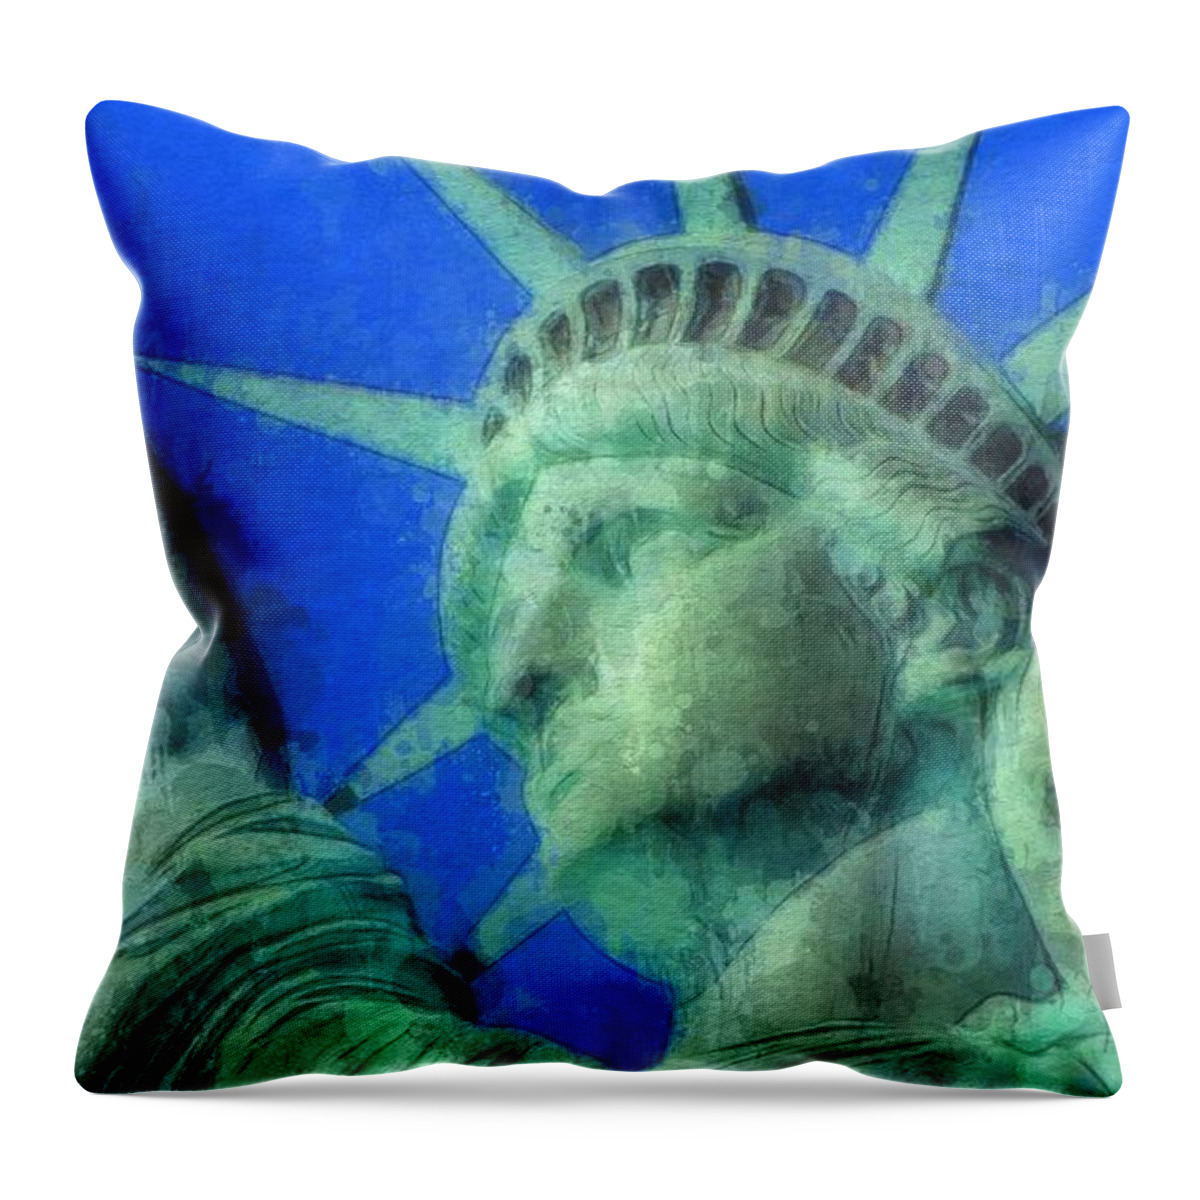 Liberty Throw Pillow featuring the painting I Lift My Lamp by Sandy MacGowan